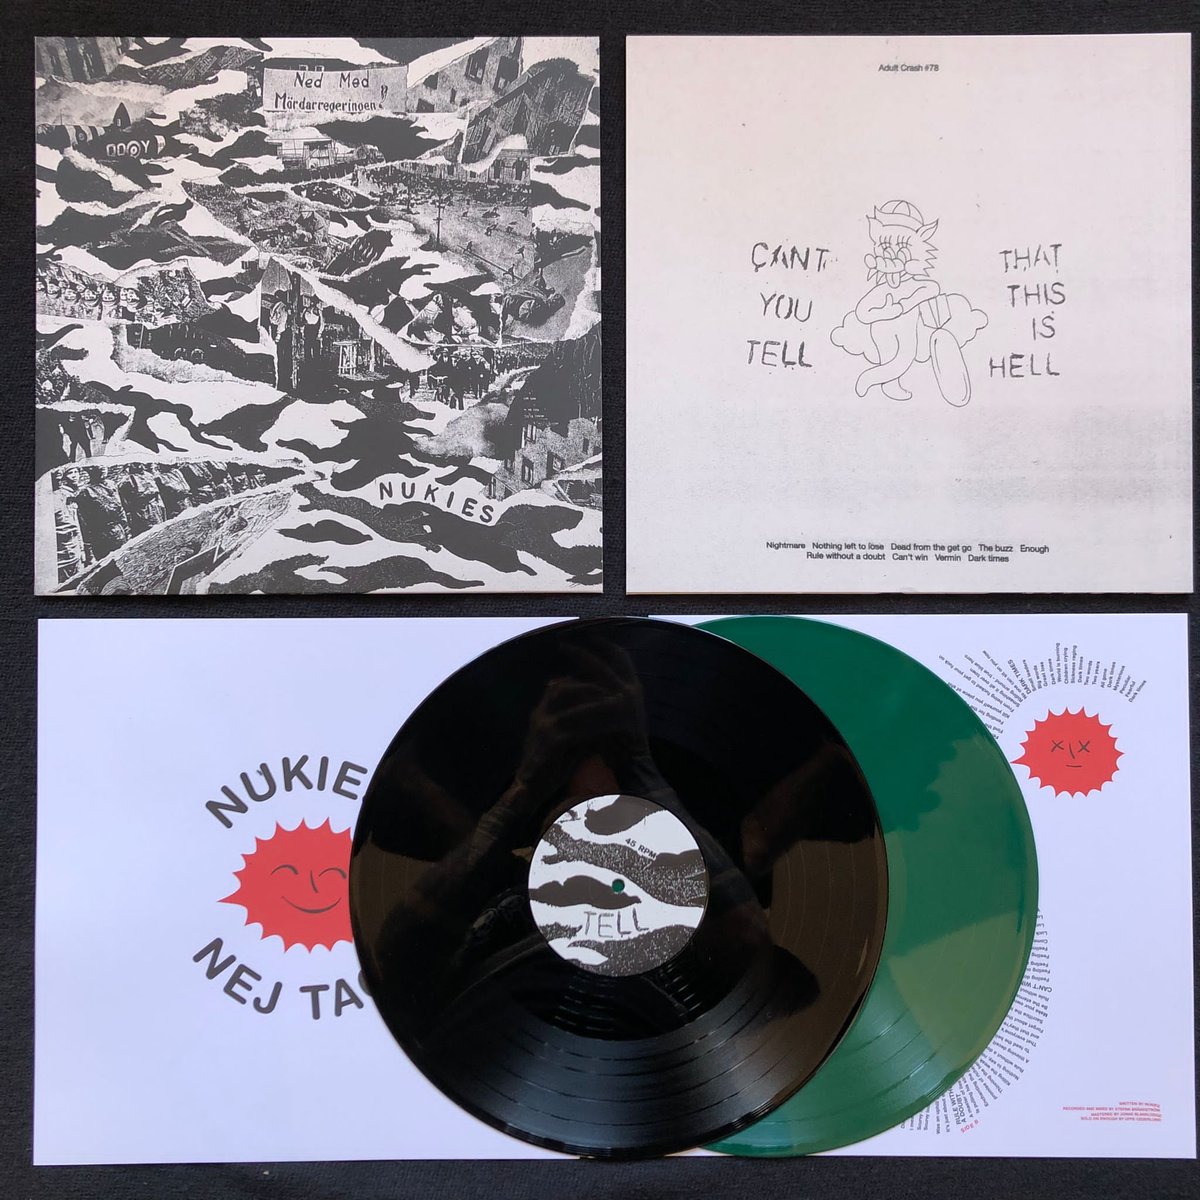 Image of NUKIES "Can't you tell that this is Hell" 12"